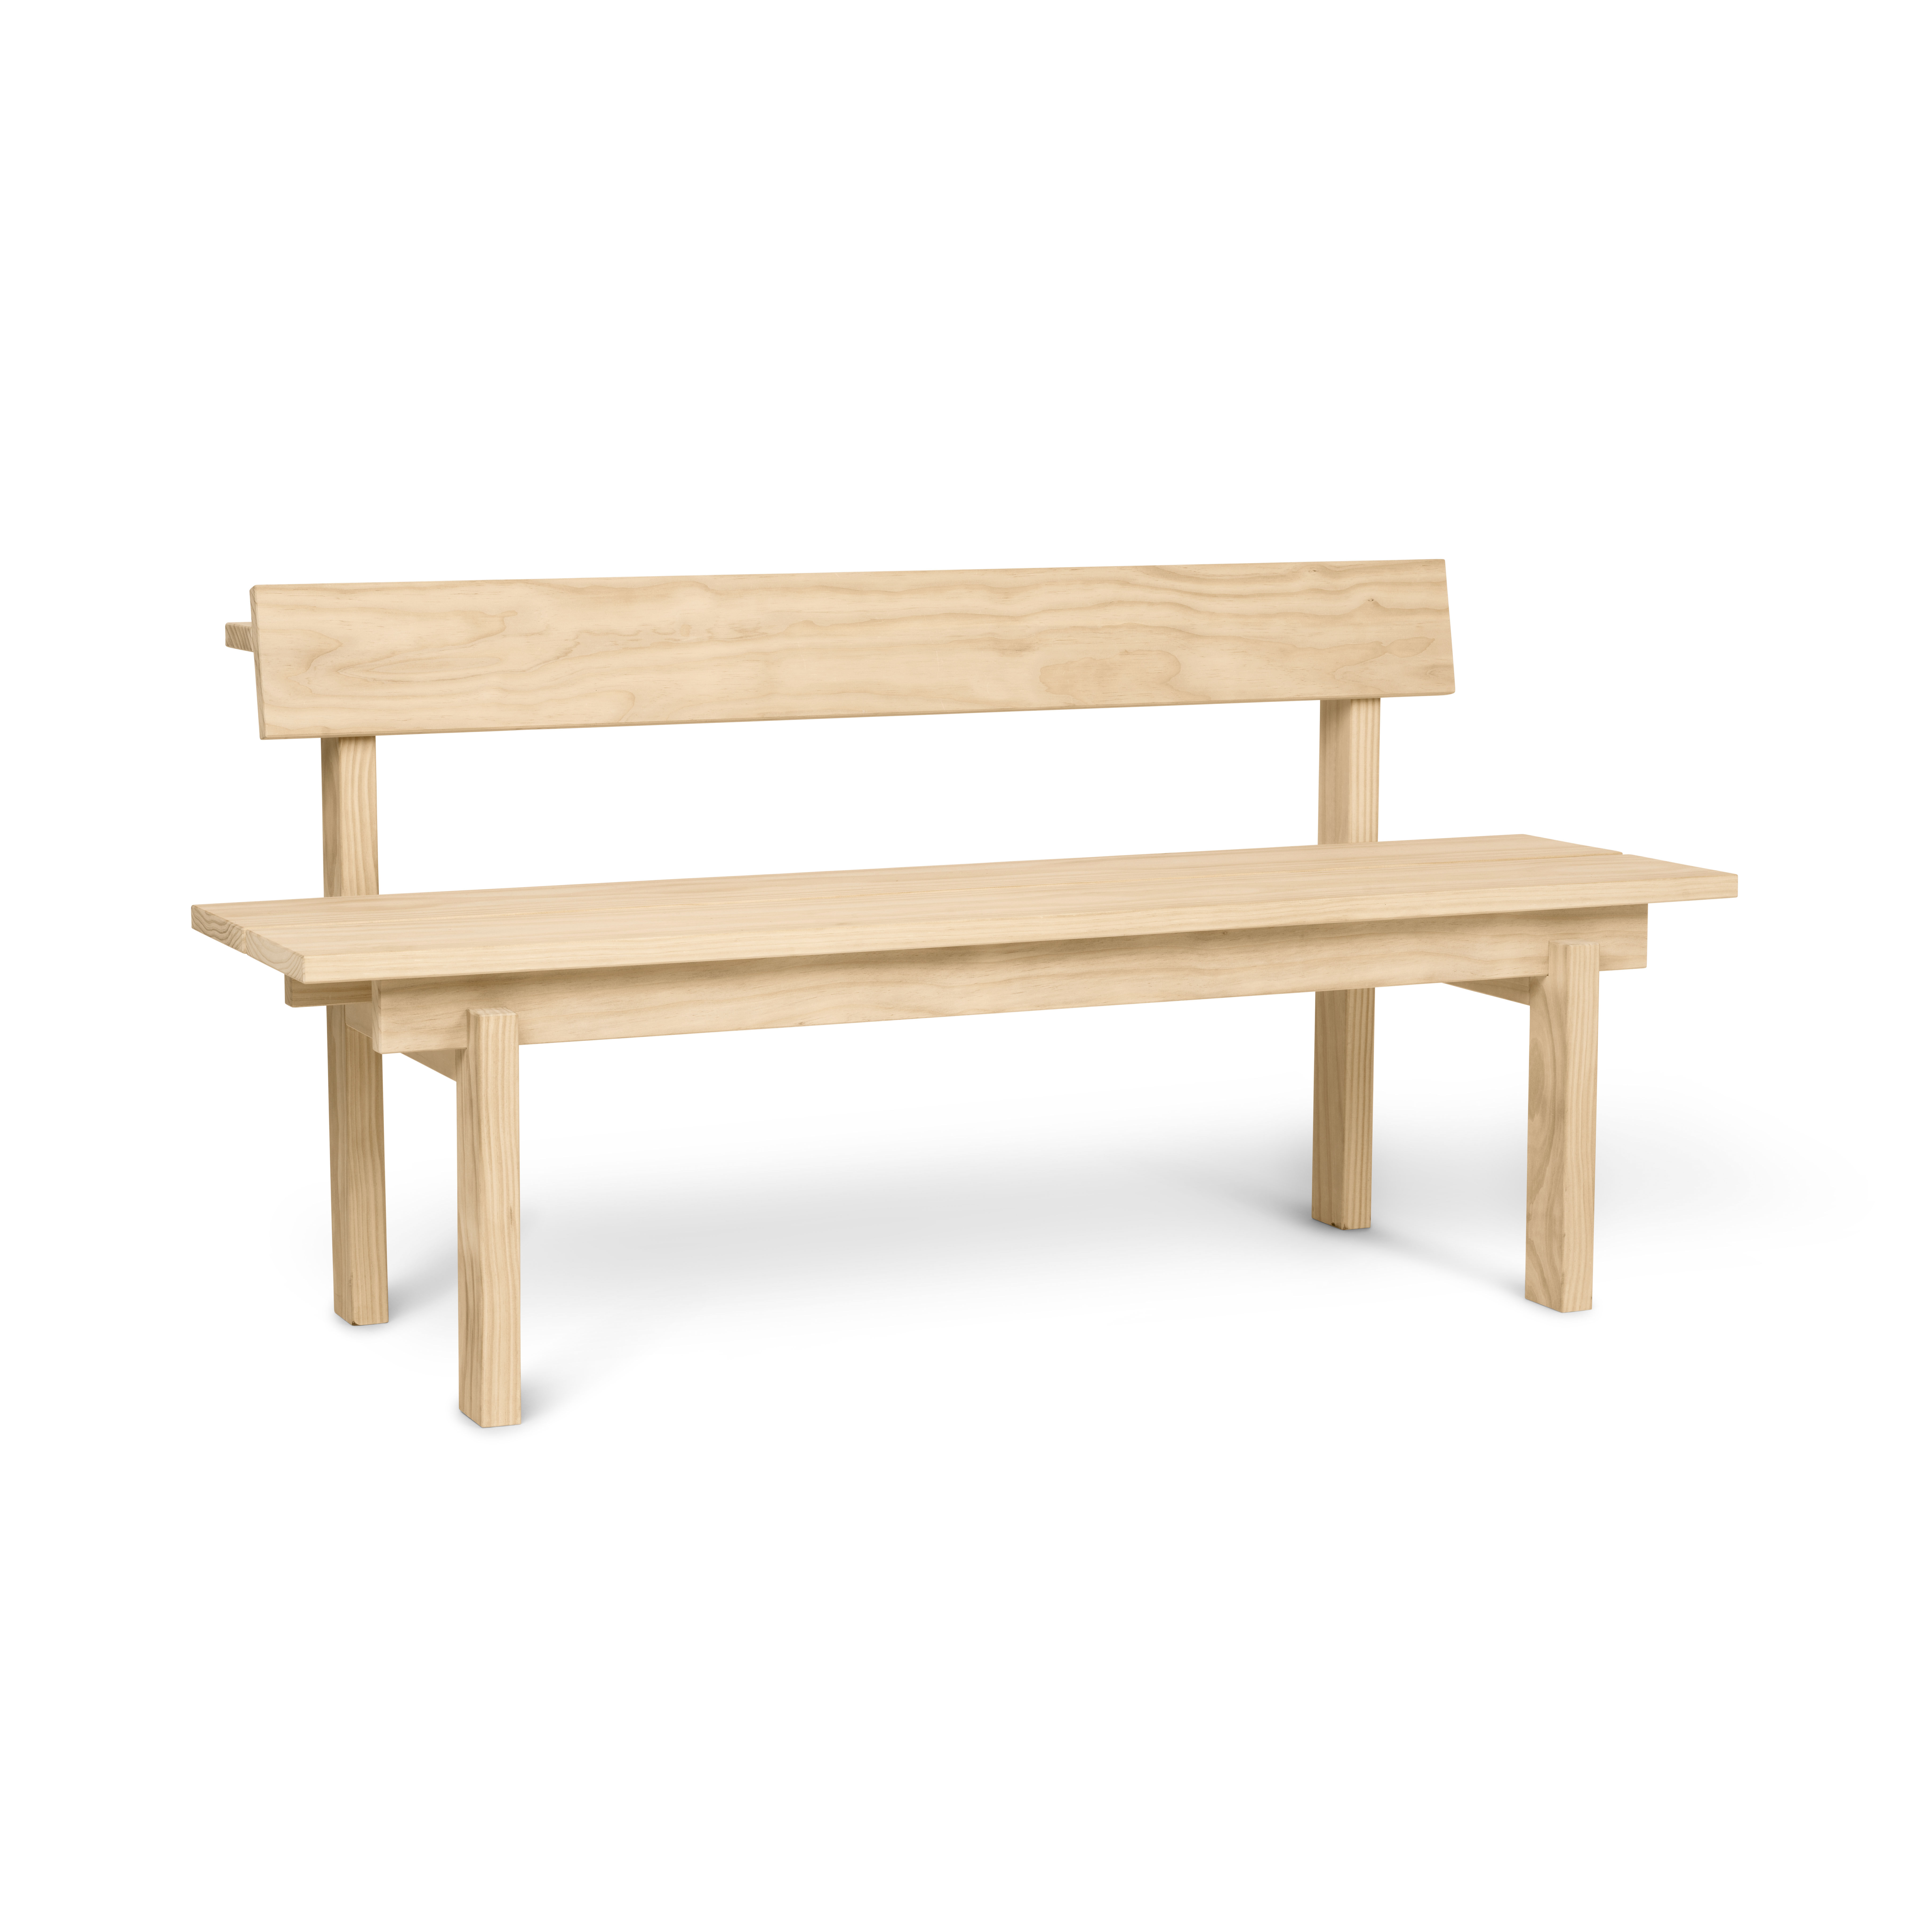 Peka Outdoor Bench With Backrest, Outdoor Bench With Backrest